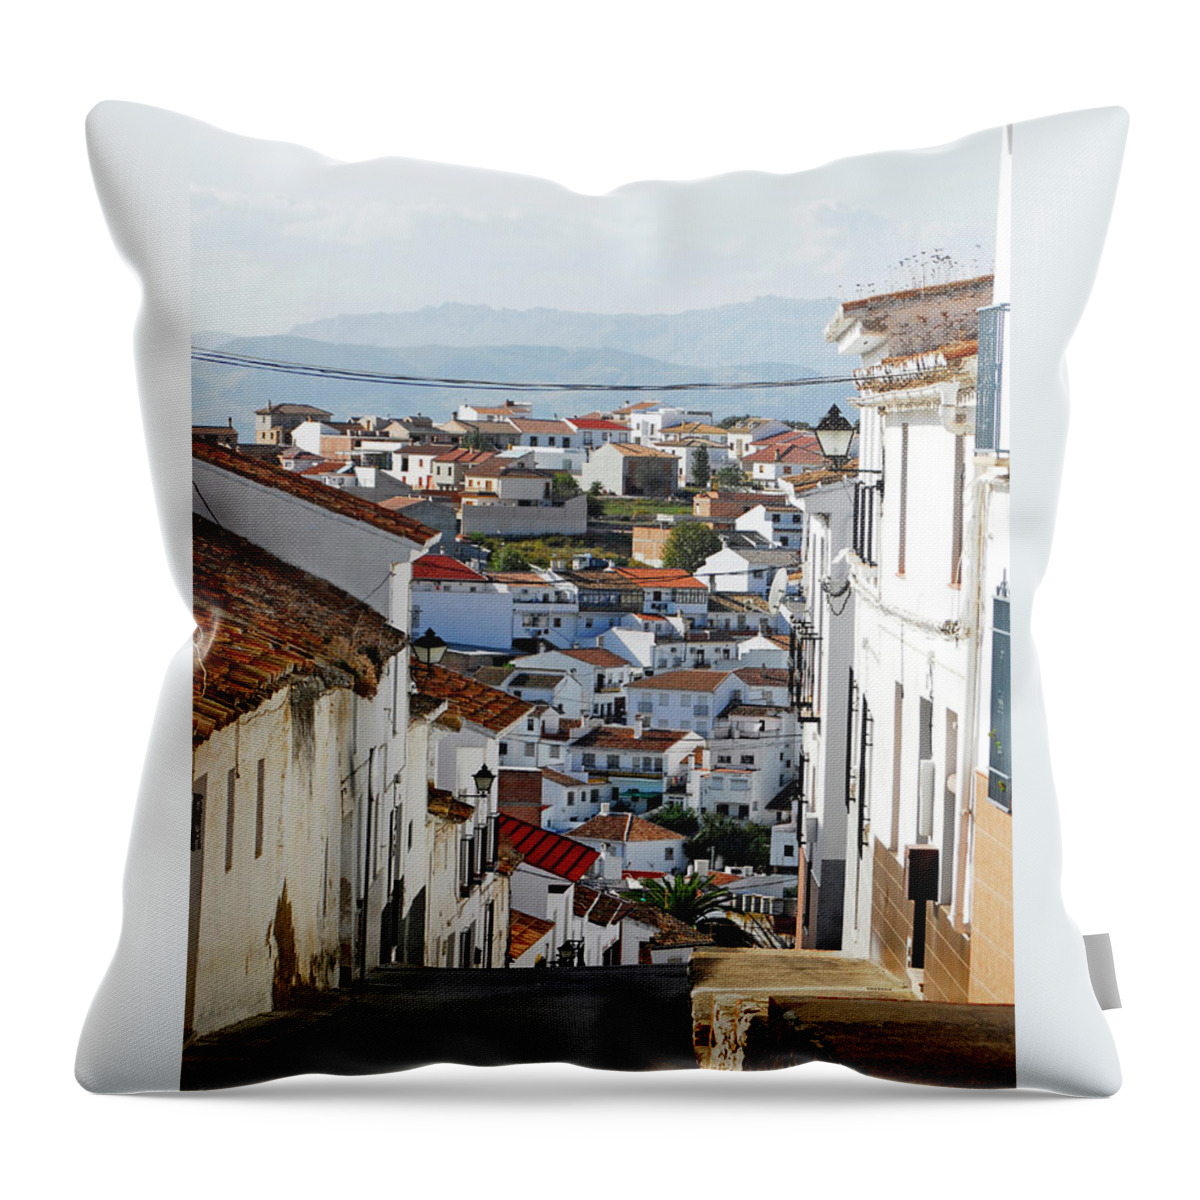 Mount Throw Pillow featuring the photograph Village in South Spain by Severija Kirilovaite